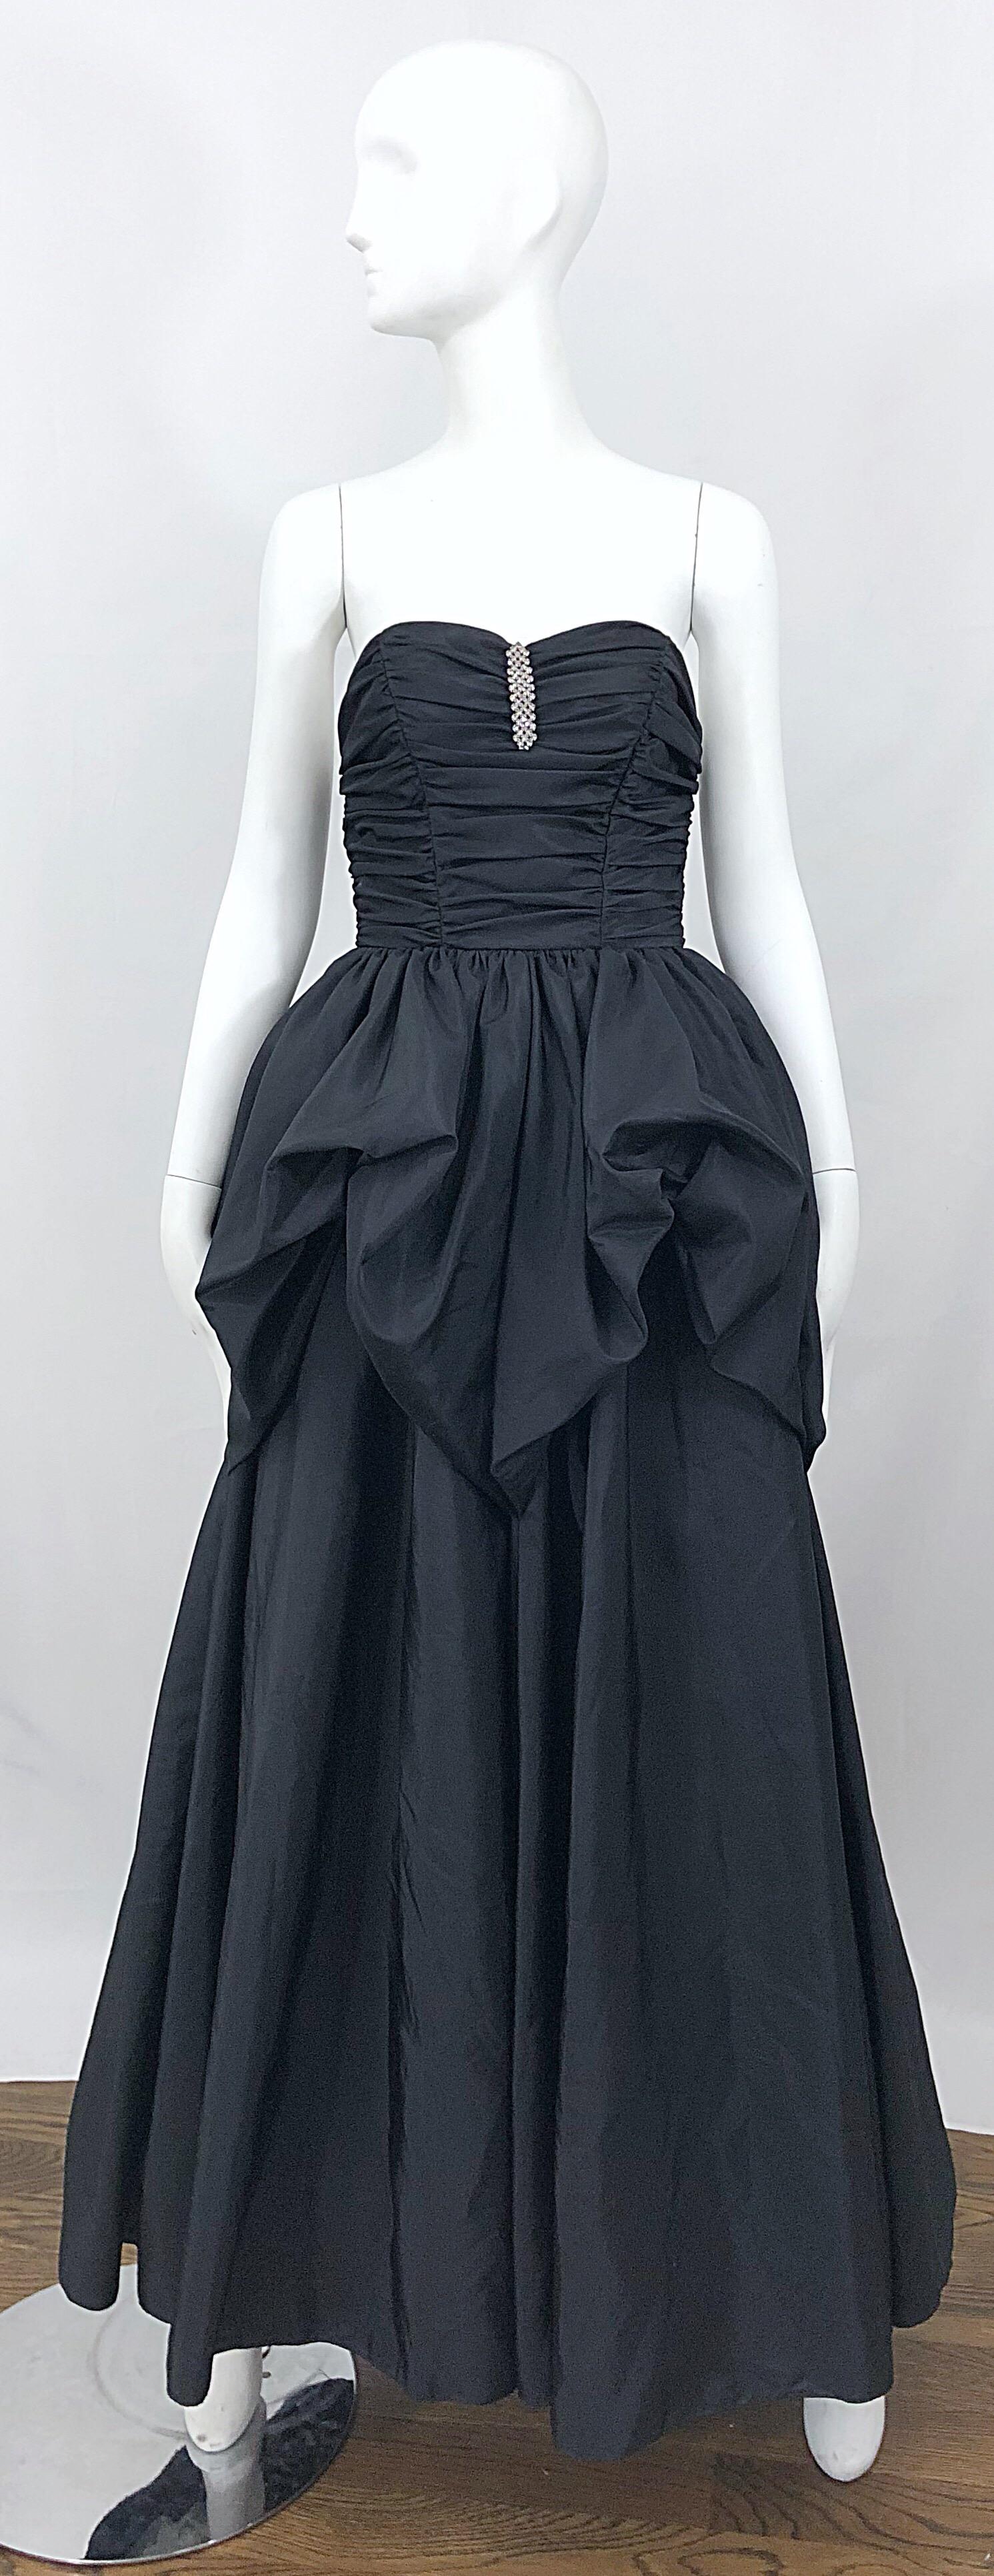 Vintage Mike Benet Sz 0/2 1980s Black Strapless Rhinestone Strapless Bustle Gown For Sale 6